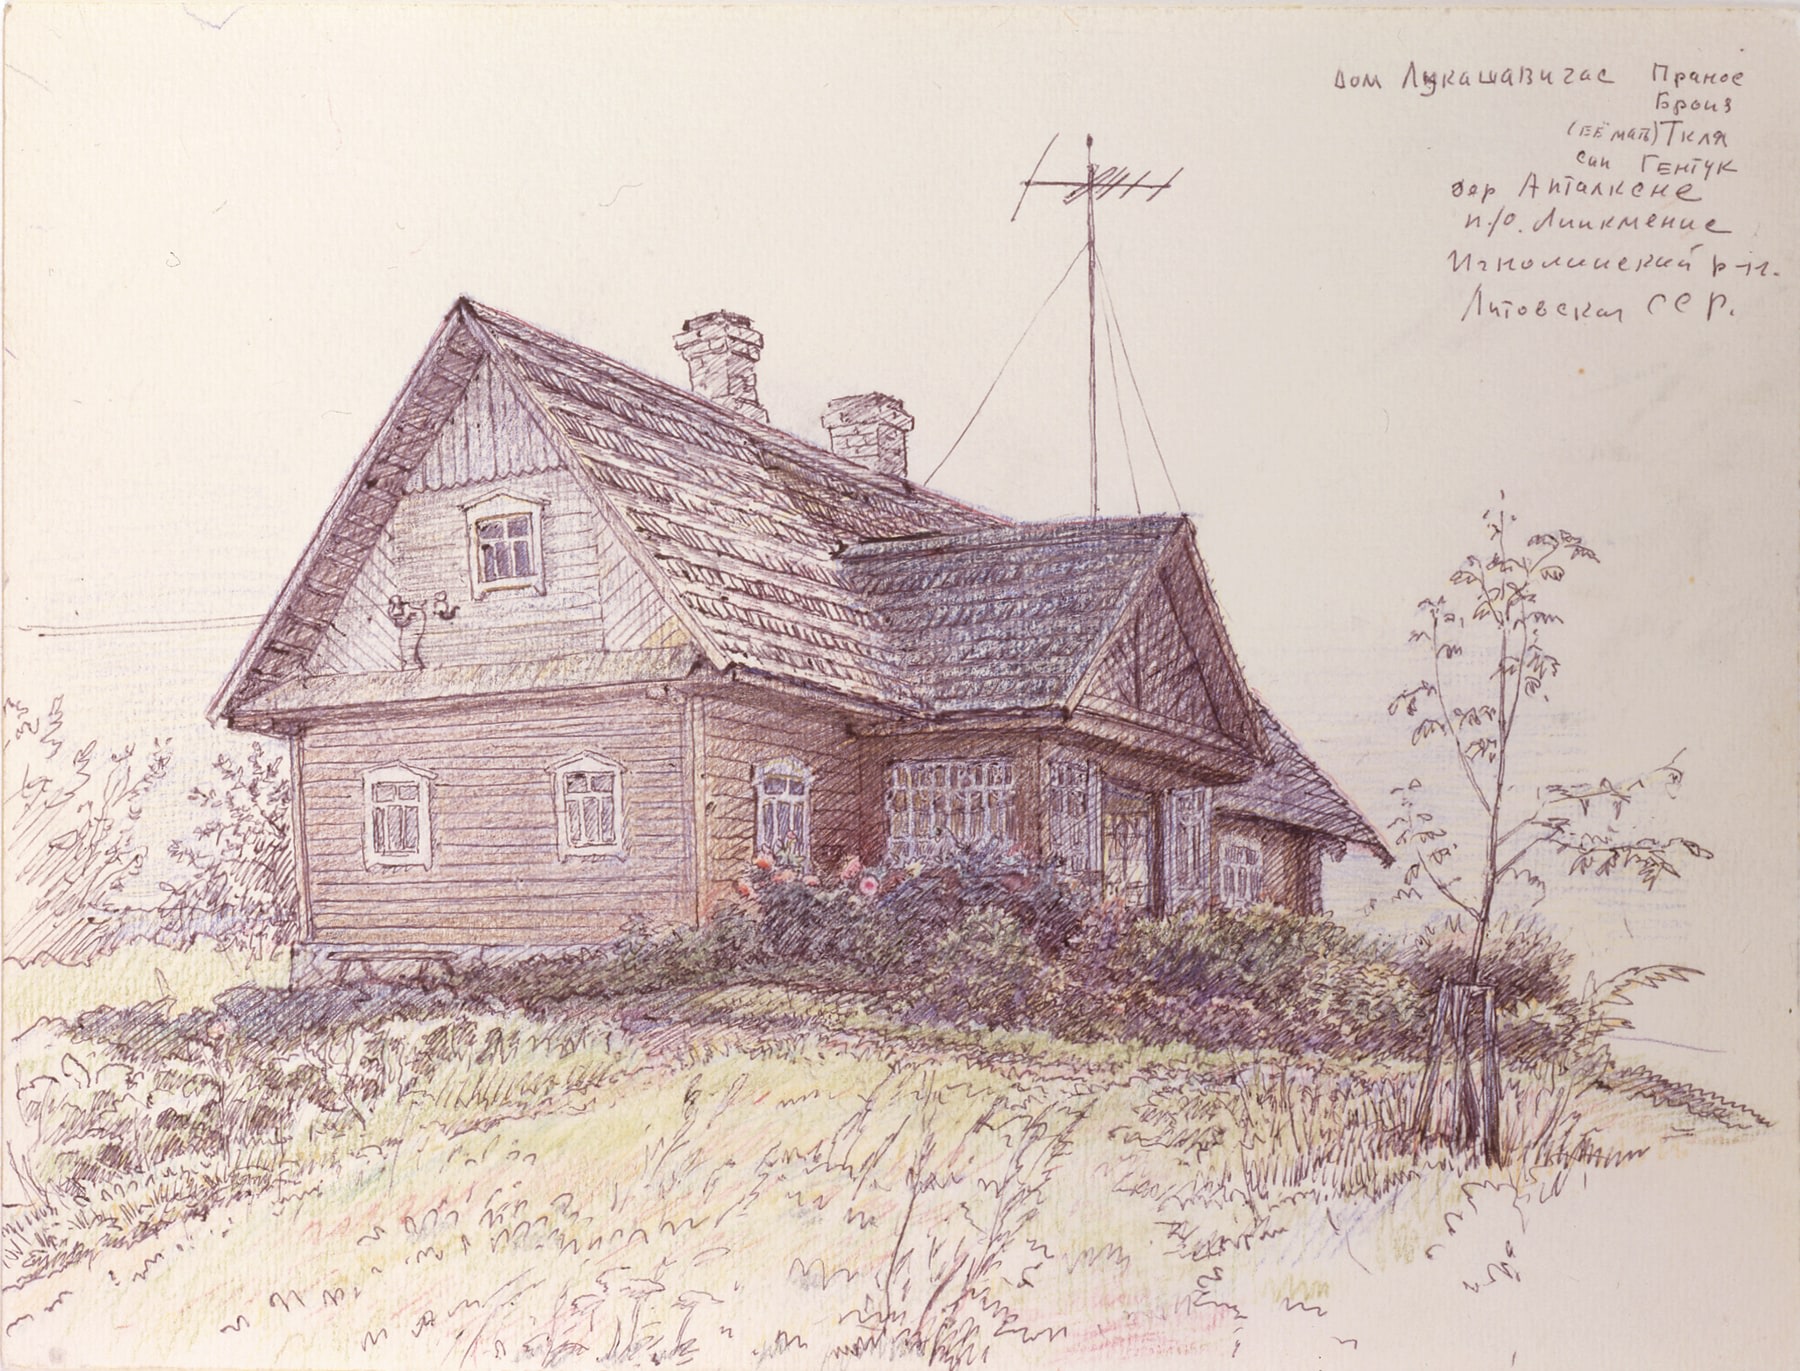 Oleg Vassiliev, House with TV Antenna, 1986-87, graphite, pen, and colored pencil on paper, 9 3/8 x 12 1/2 inches